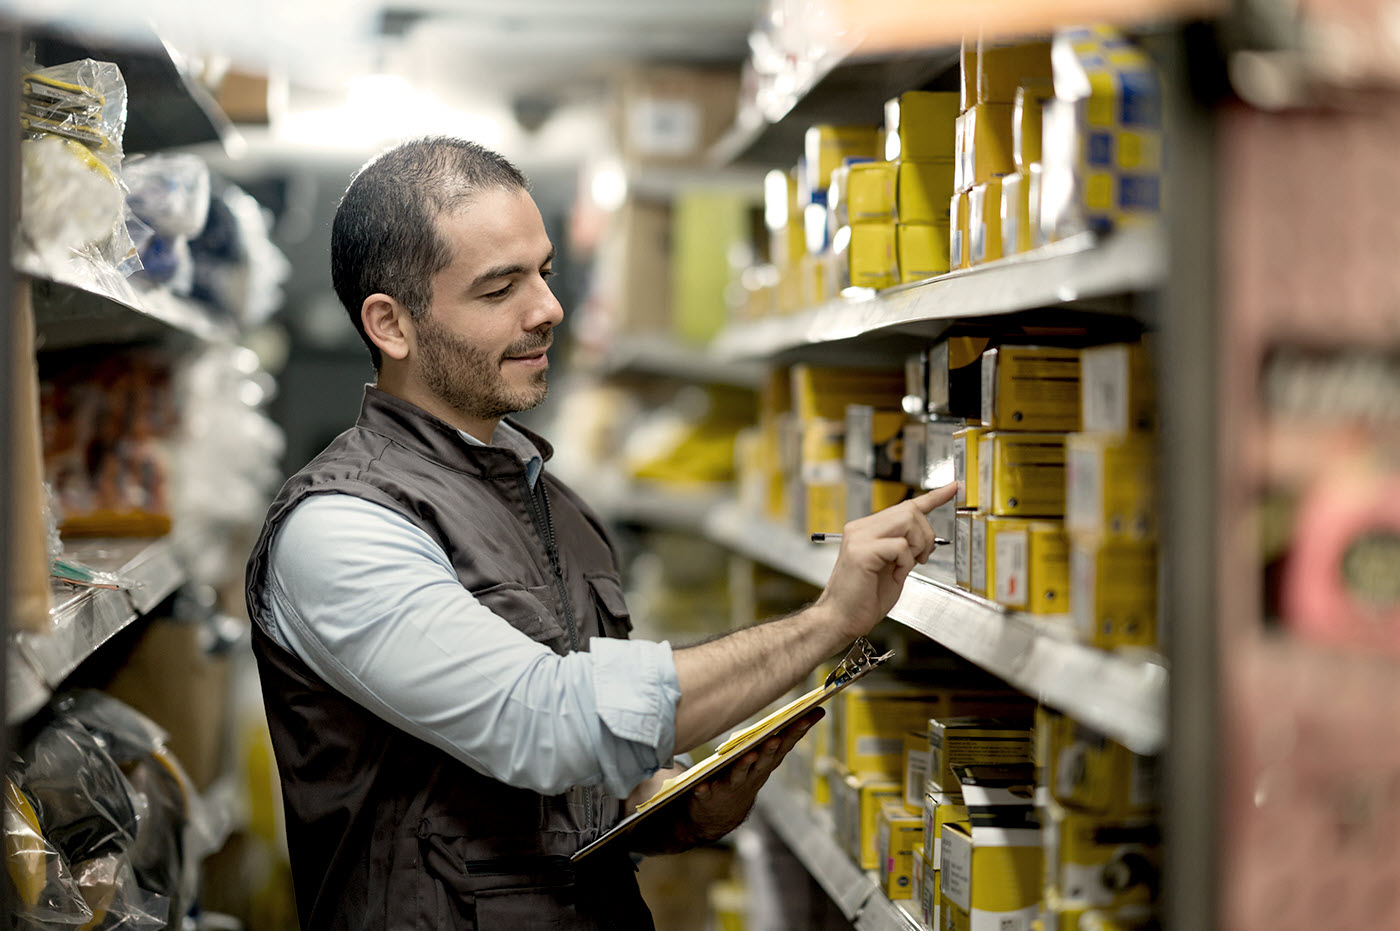 A man taking inventory of stock in a warehouse.